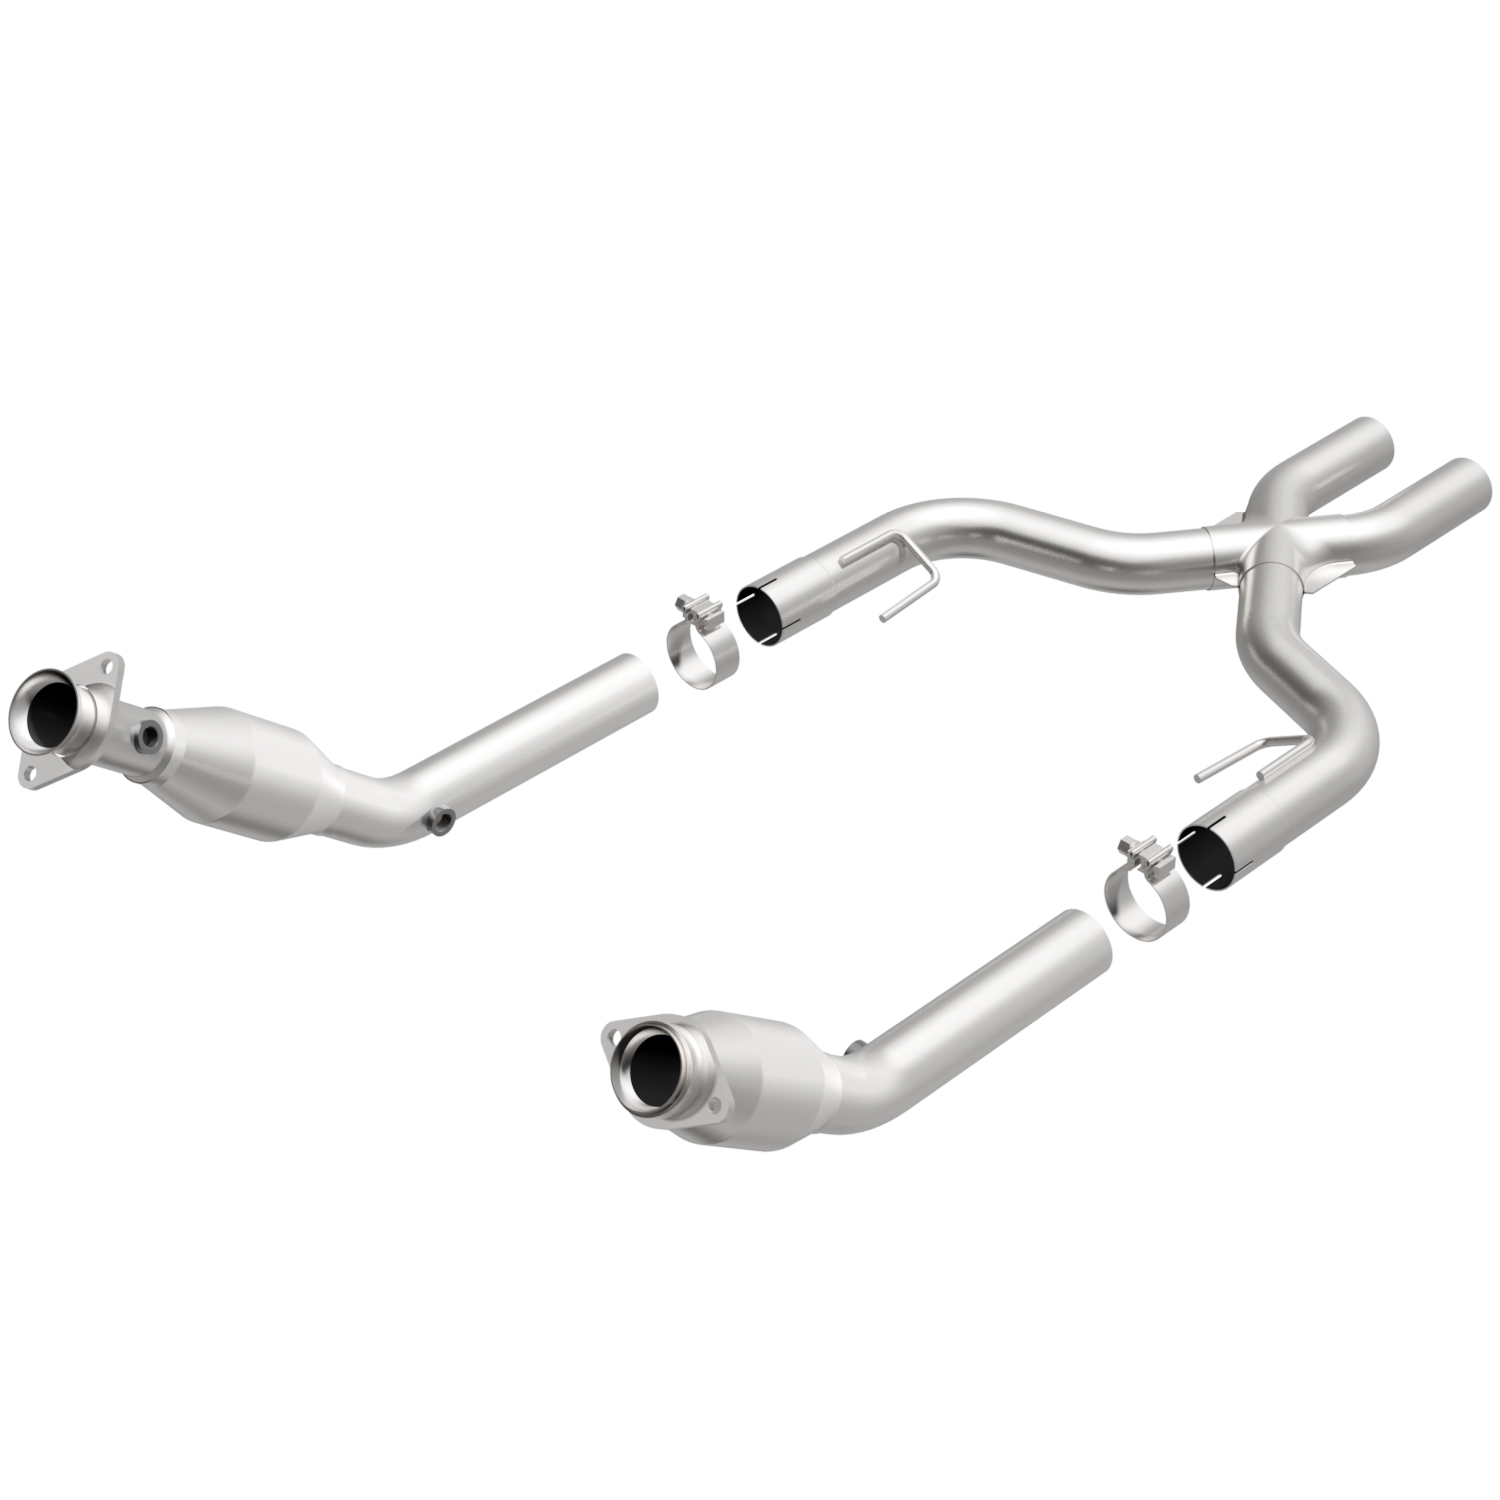 Tru-X Pipe with Metallic Spun Converters 2007-08 Ford Mustang Shelby GT500 5.4L